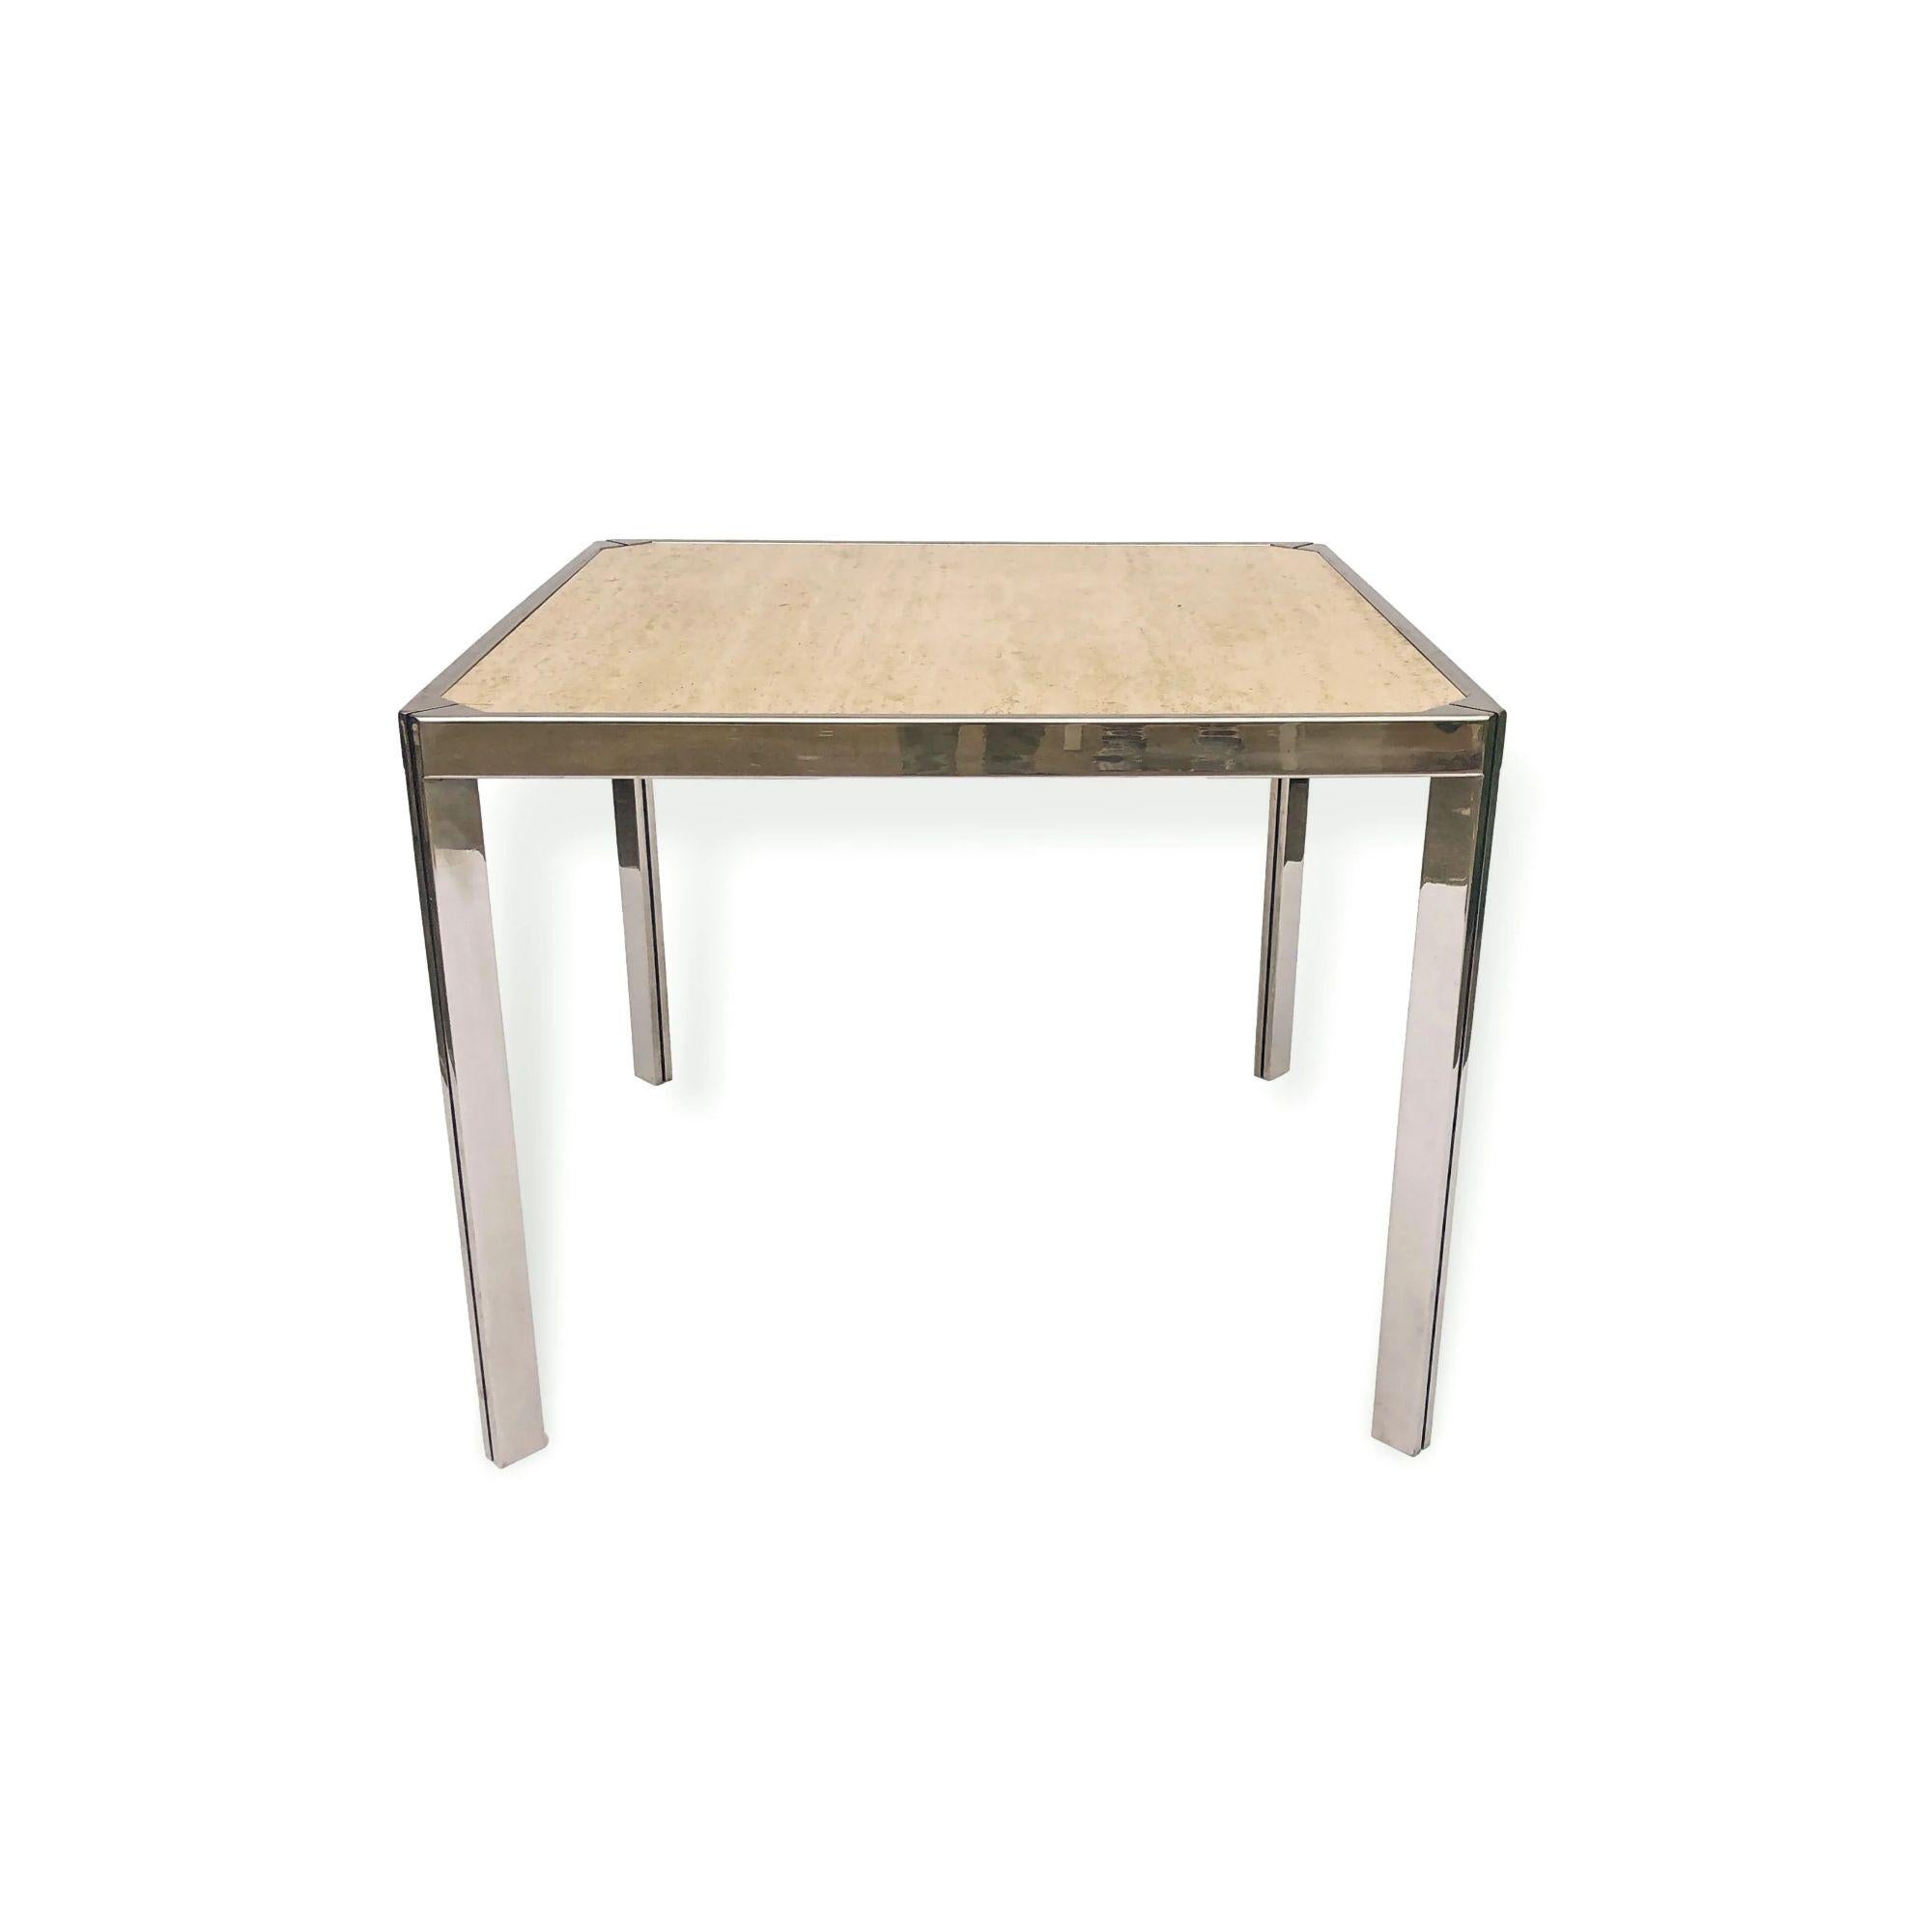 This vintage mid century square travertine and nickel game table or small dining table in the style of Milo Baughman or Willy Rizzo was made in France circa 1970. The sleek, minimalist design features a polished nickel-plated steel frame with 45